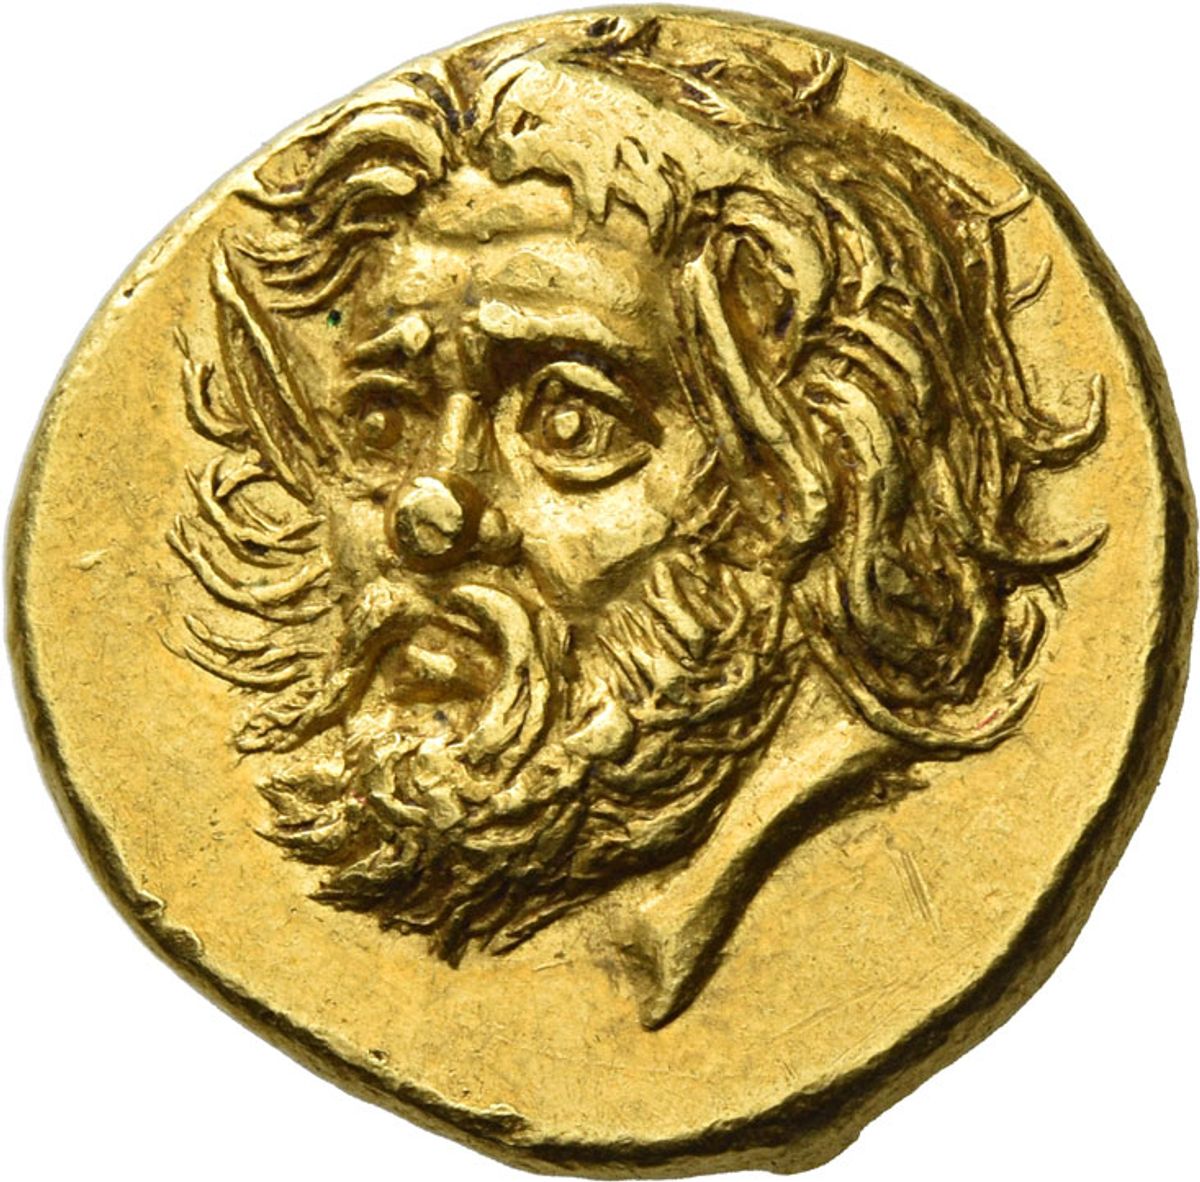 The gold stater from Panticapaeum showing the face of a satyr (around 340BC-325BC) Courtesy of Numismatica Ars Classica